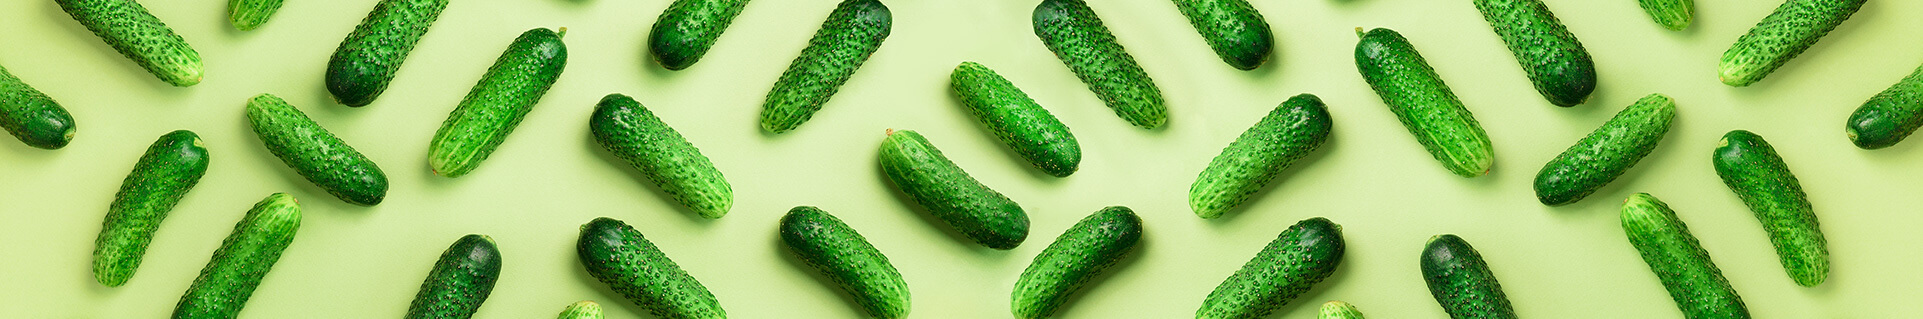 Pickles against a light green background